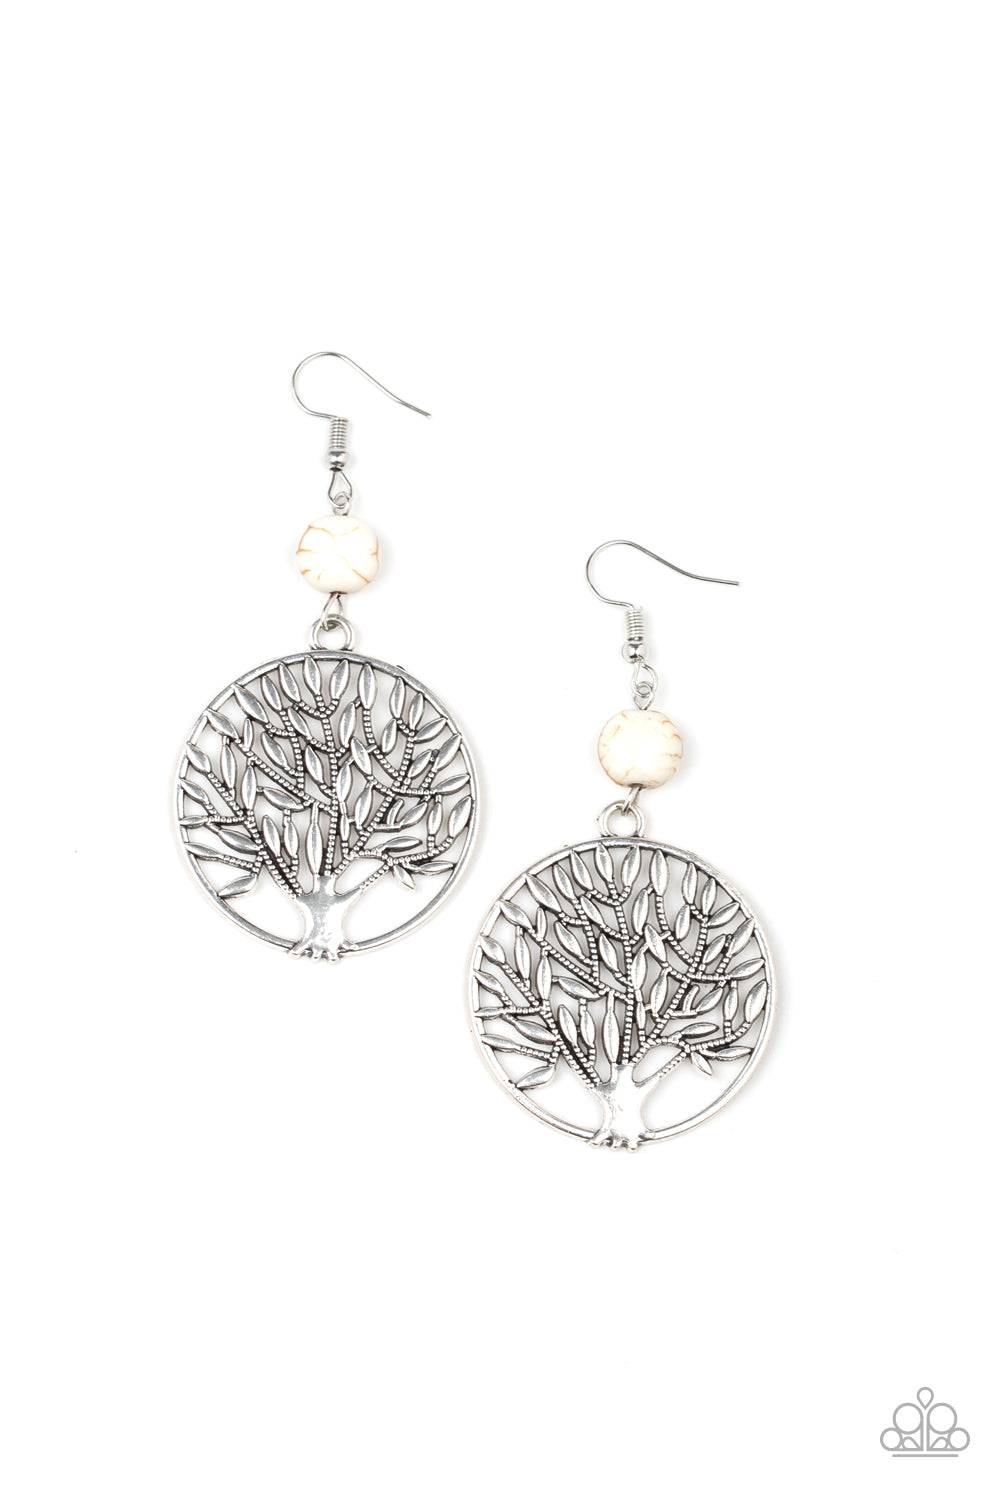 BOUNTIFUL BRANCHES - WHITE TURQUOISE TREE OF LIFE EARRINGS